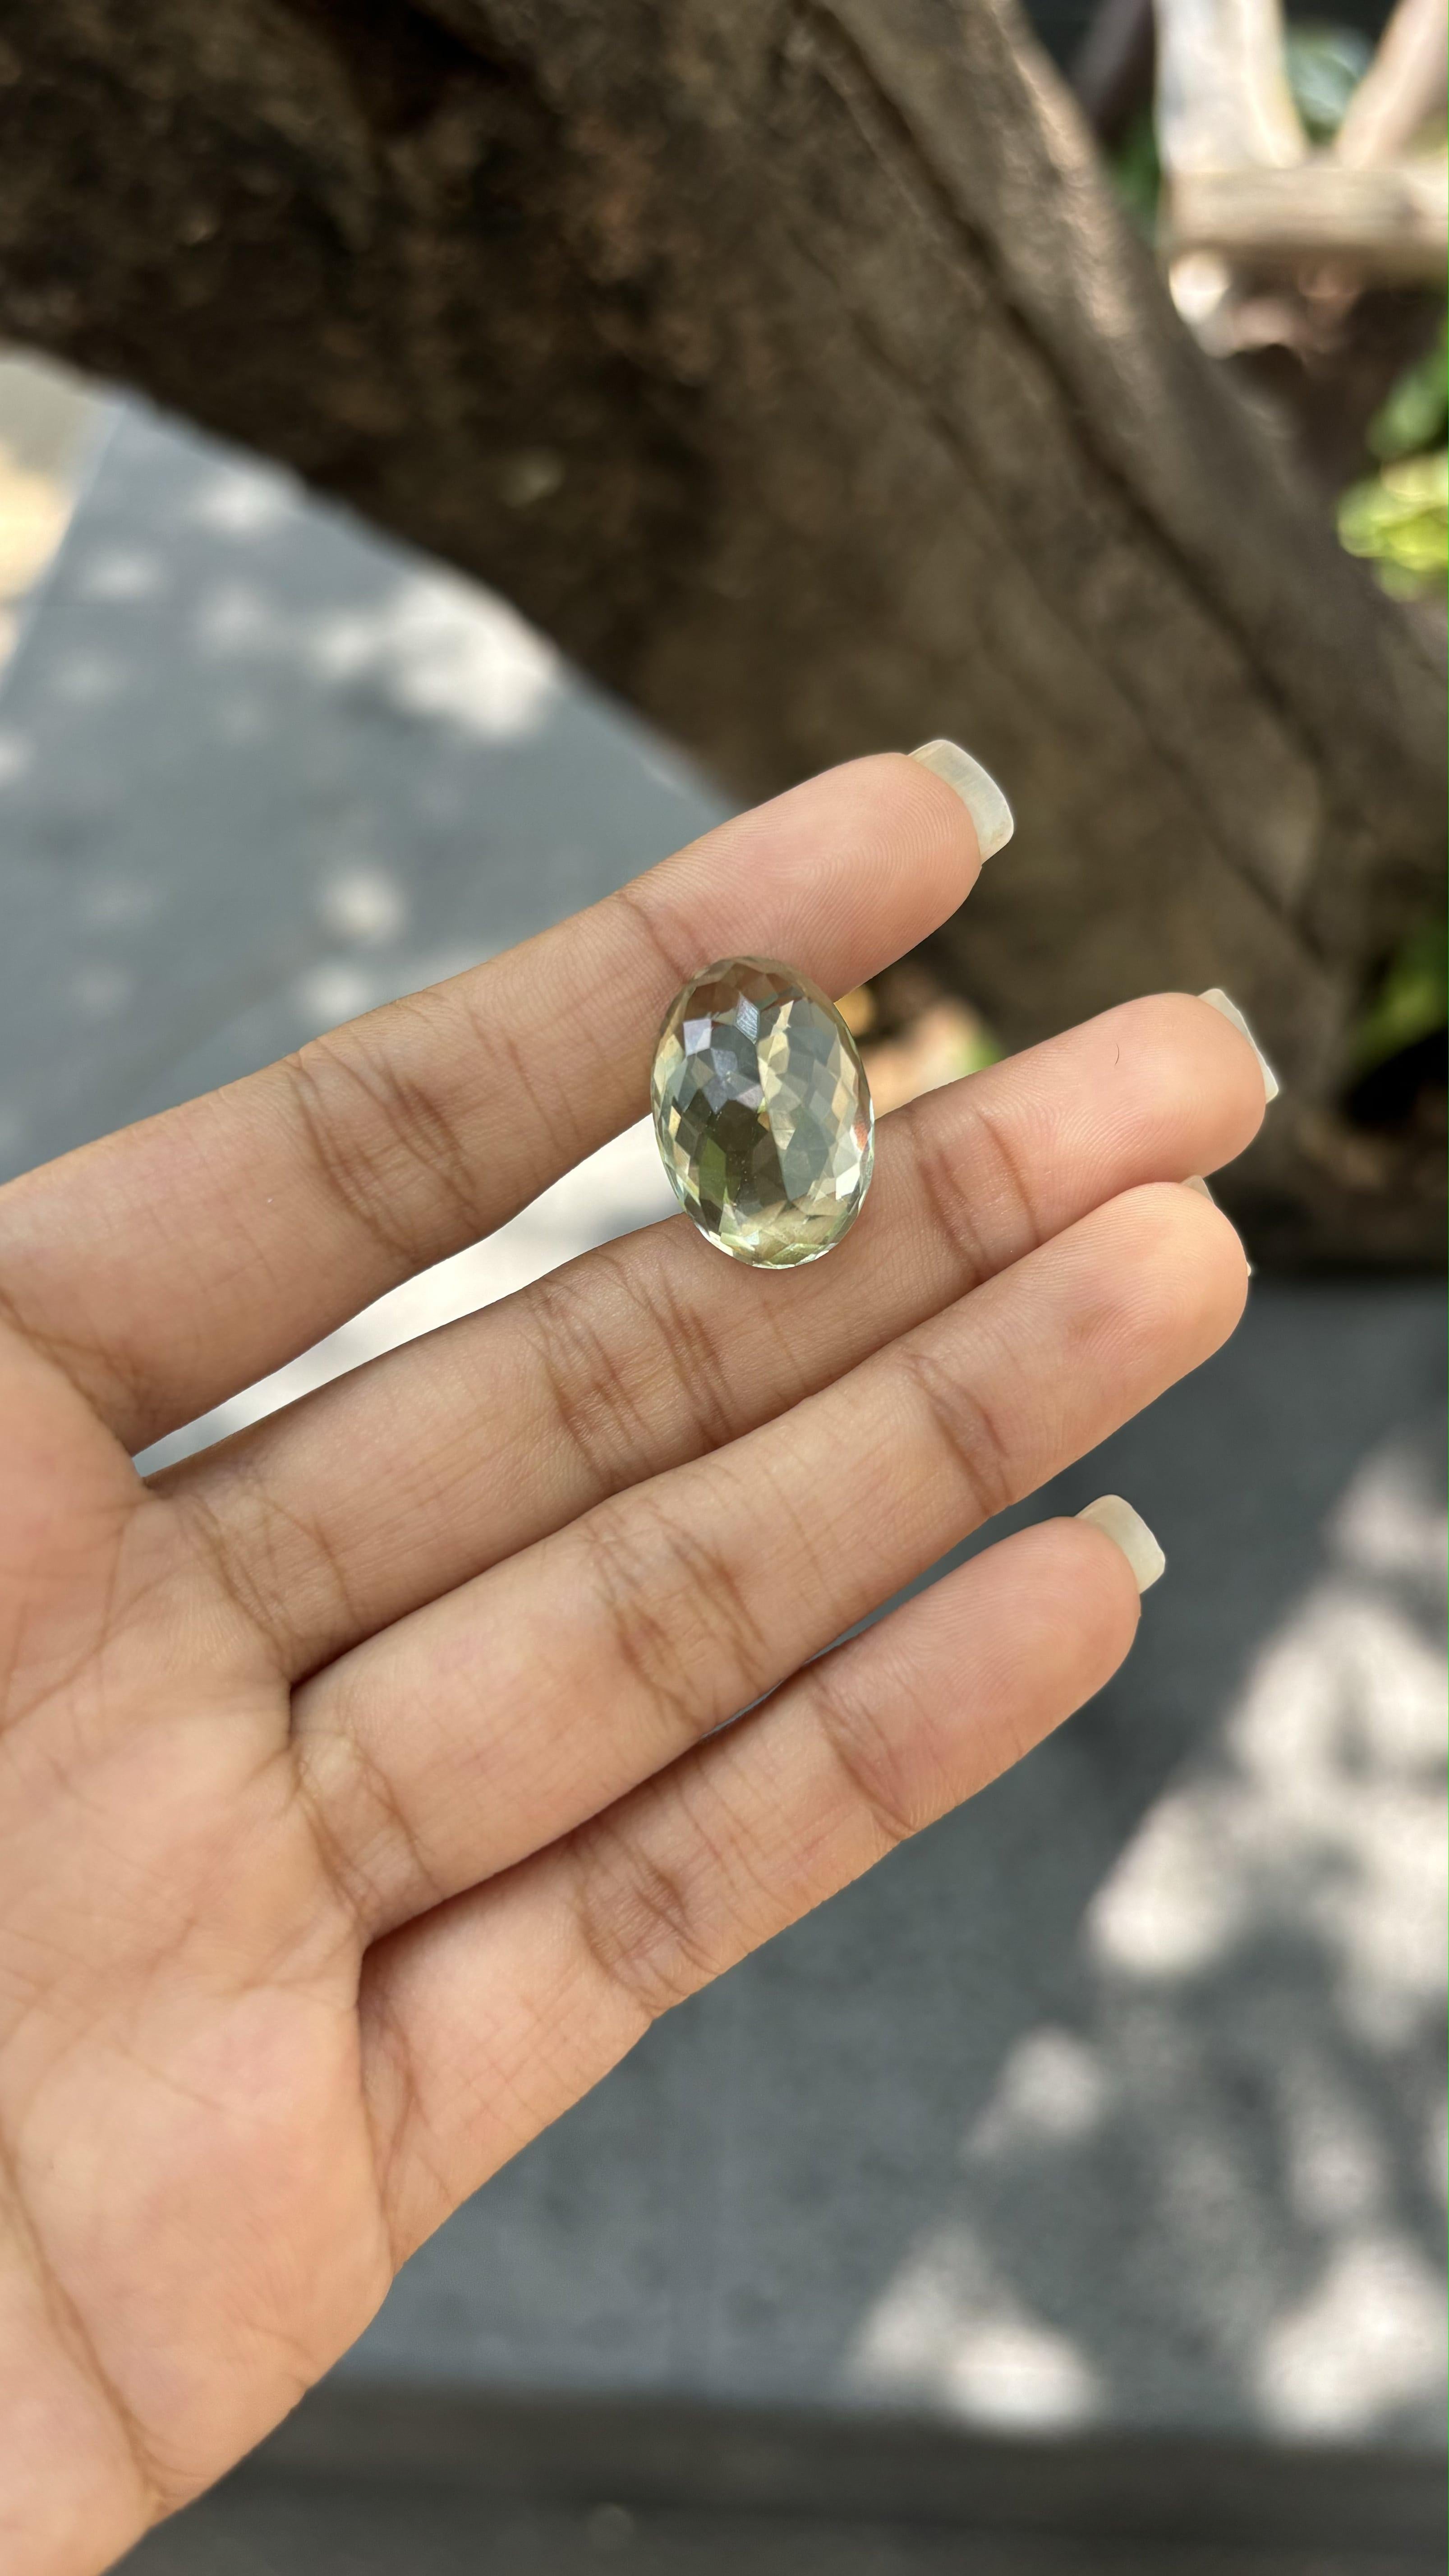 A gorgeous 15.55 Carat Quartz gemstone. It is completely natural and it is a clean stone.  The quartz has a unique and breath-taking  green color that is sure to allure you at first sight! It is cut to perfection in a distinct and fancy oval